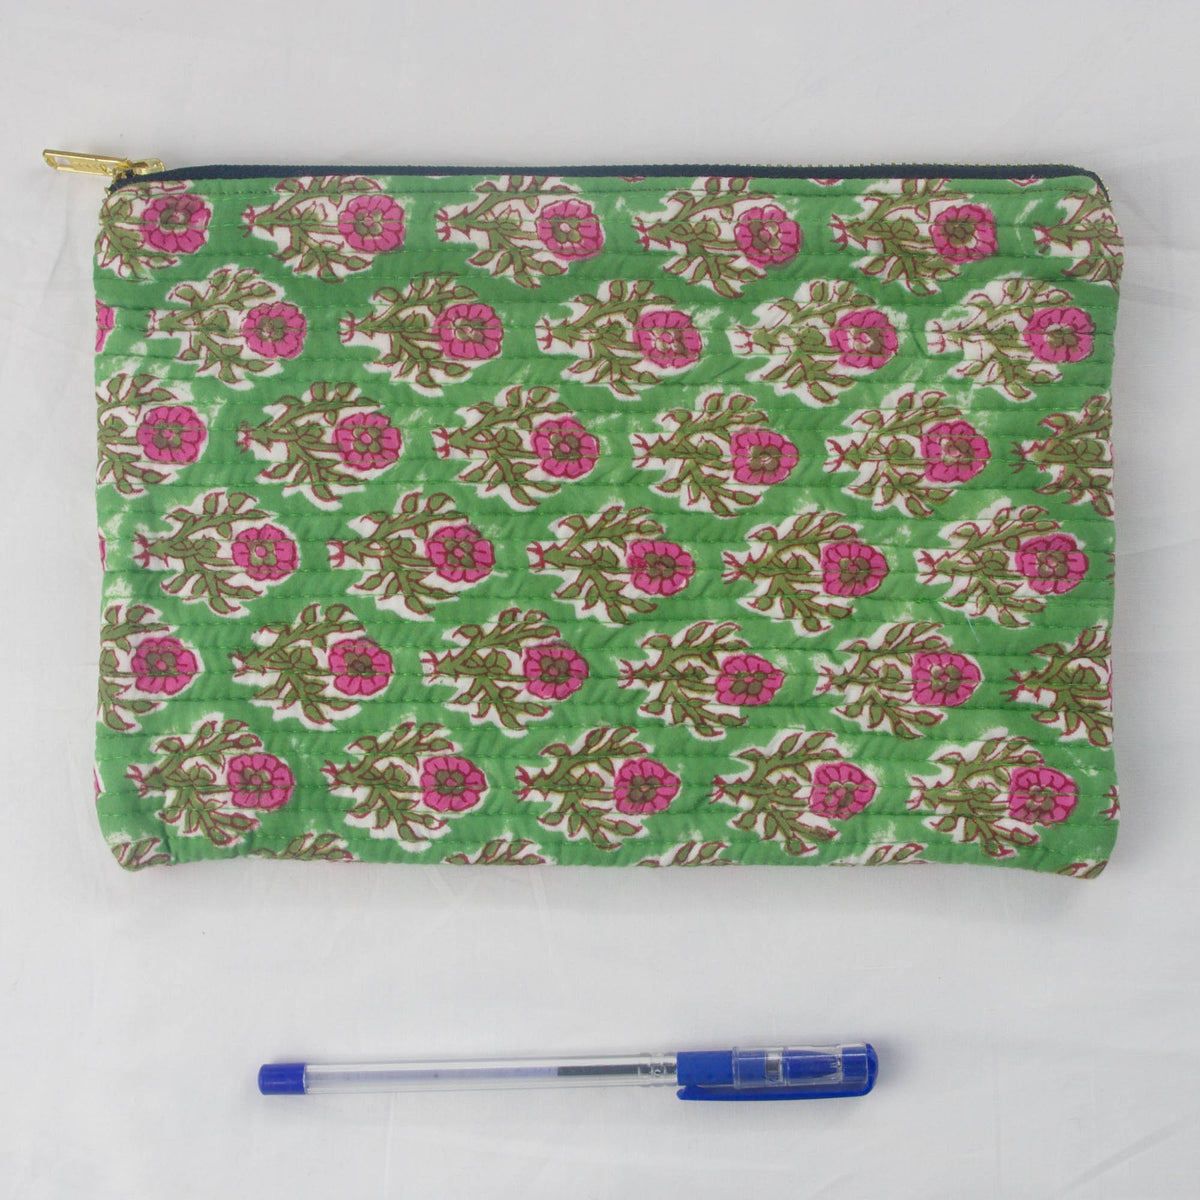 Block Print Makeup Pouch or Pencil Case- Green Pink Floral